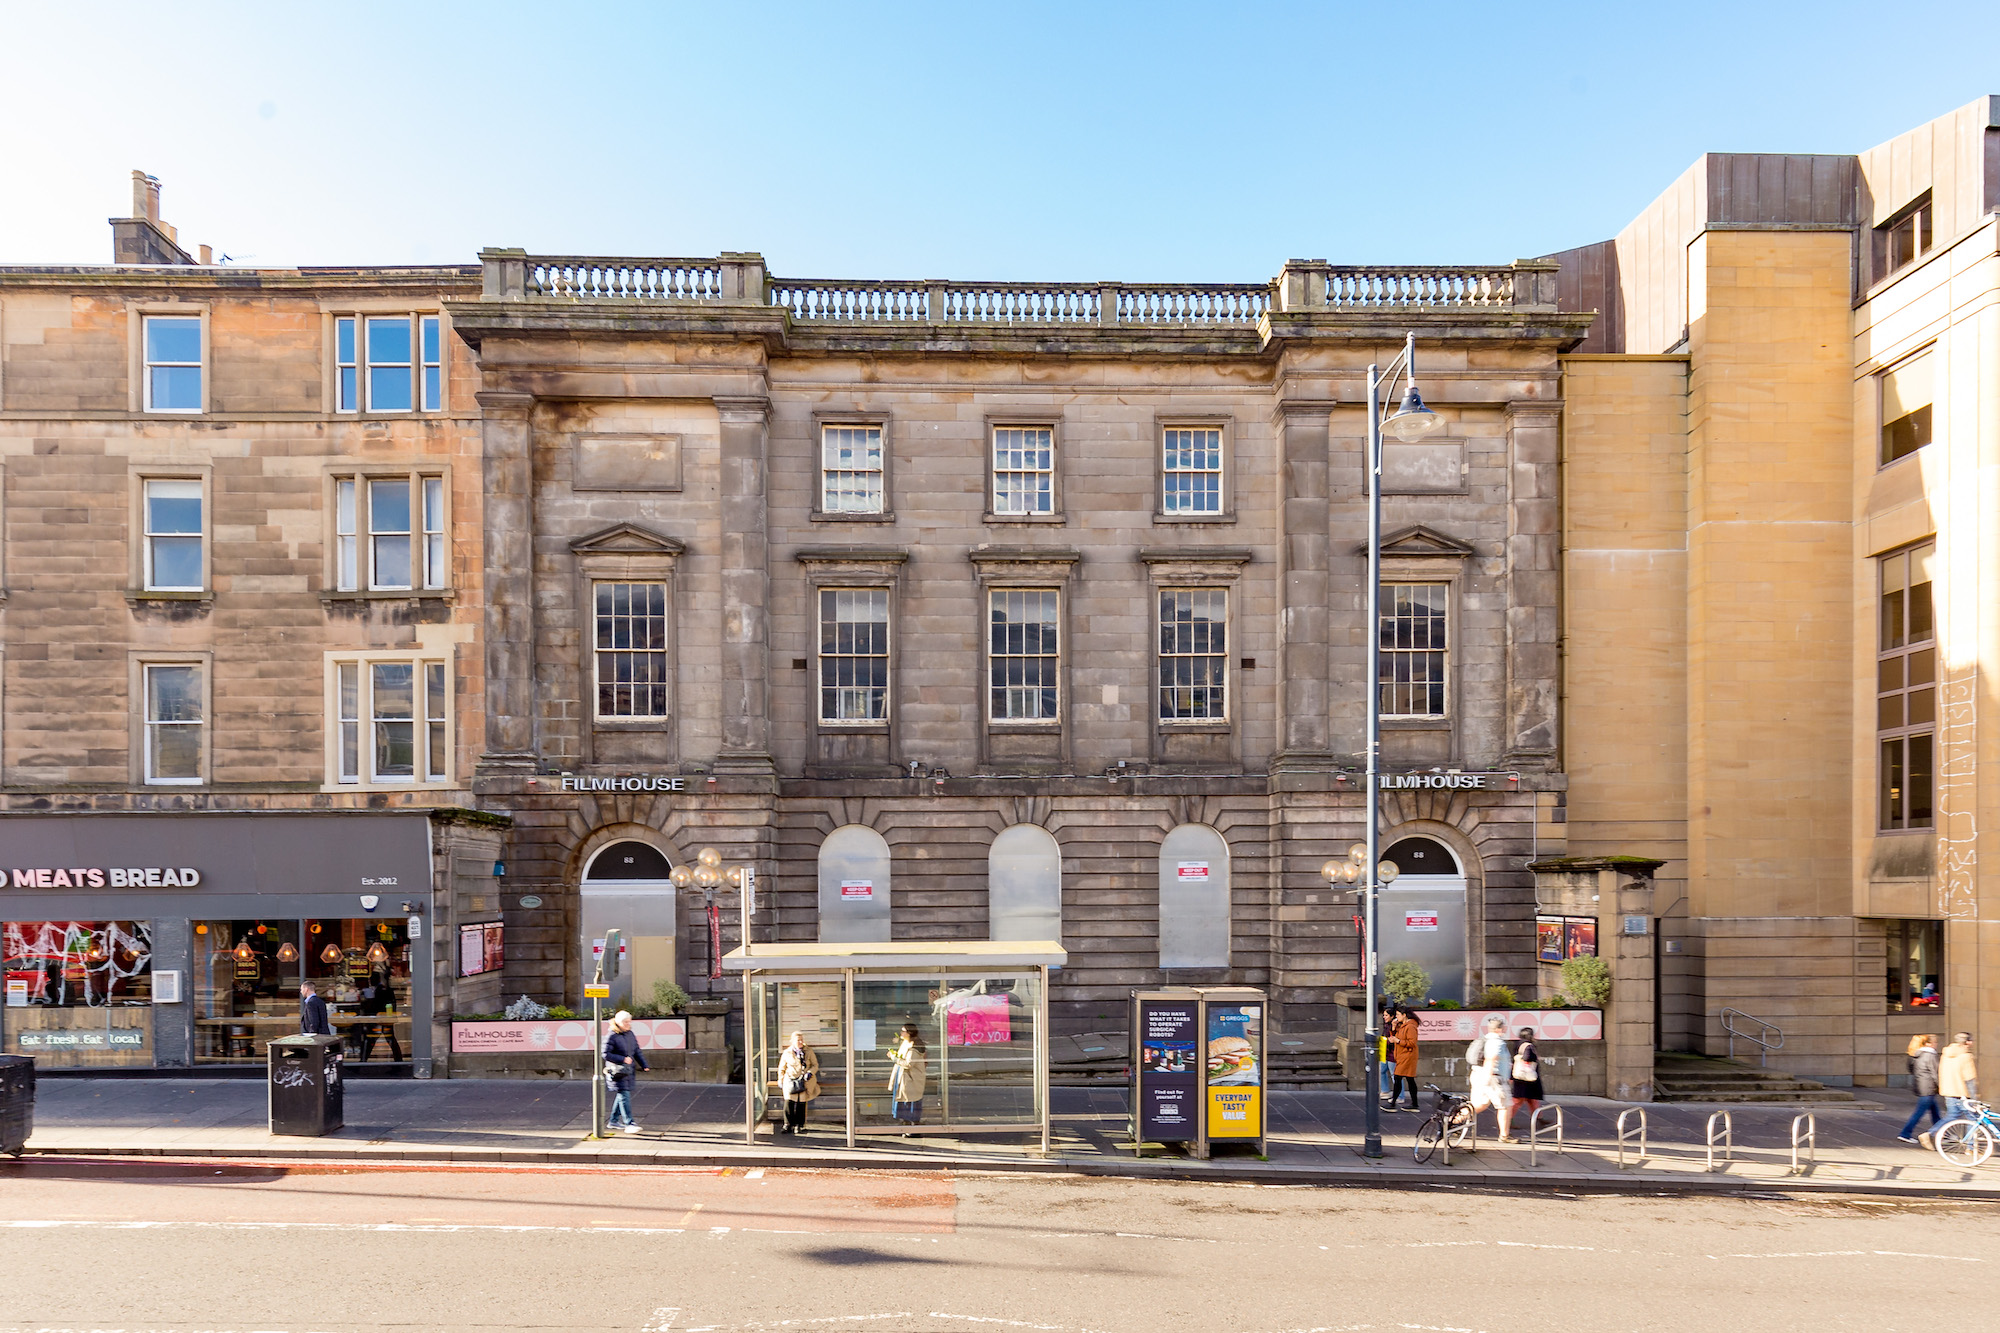 Major fundraising campaign launched to re-open Edinburgh's Filmhouse